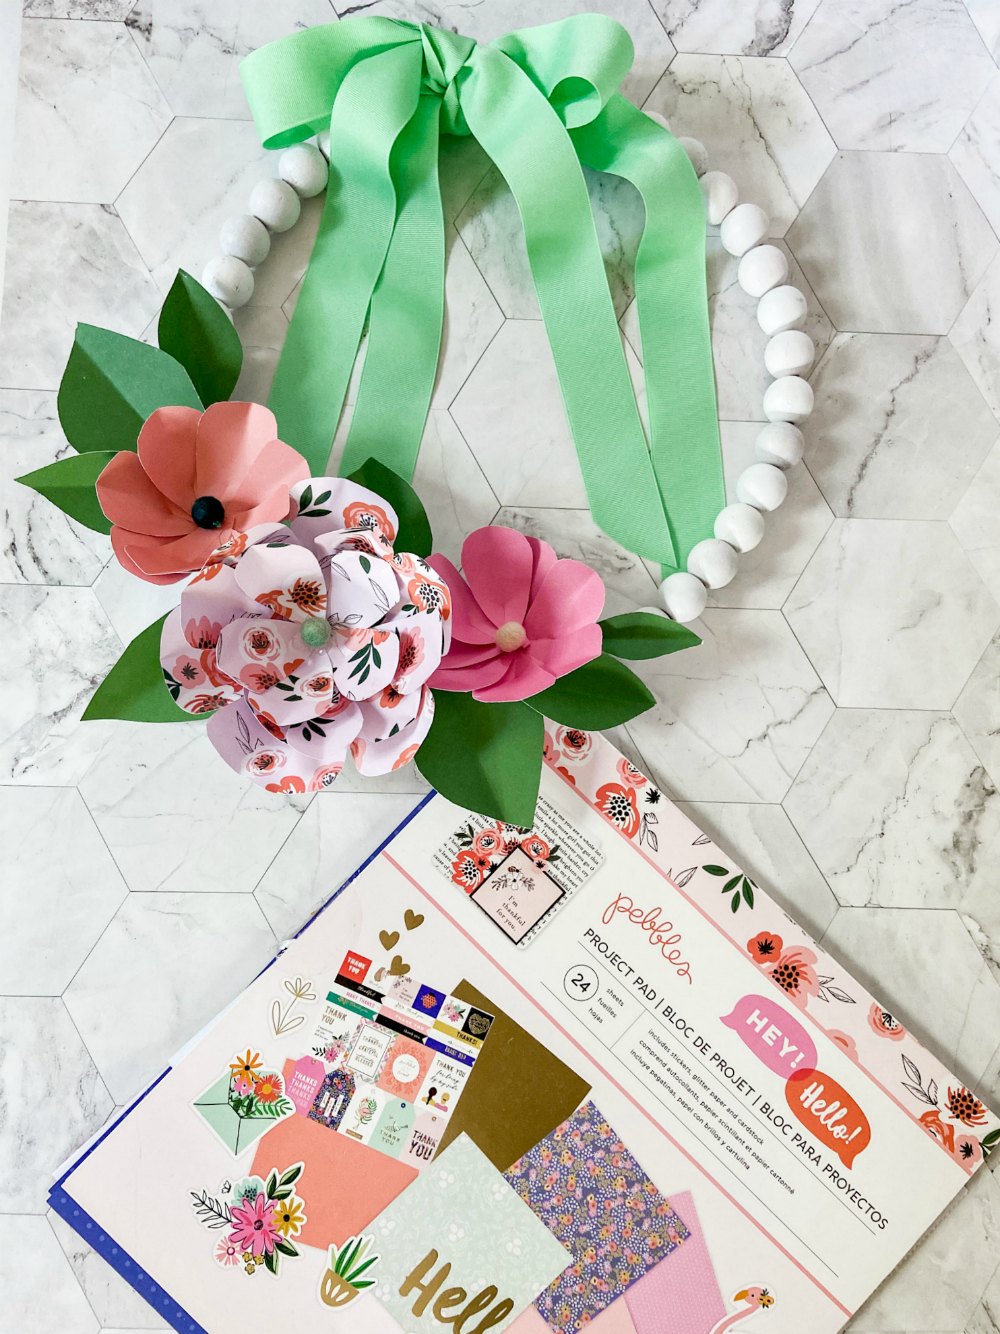 Wood Bead Wreath with Paper Flowers. Make this trendy wood bead wreath and create easy paper flowers with free petal and leaves template!